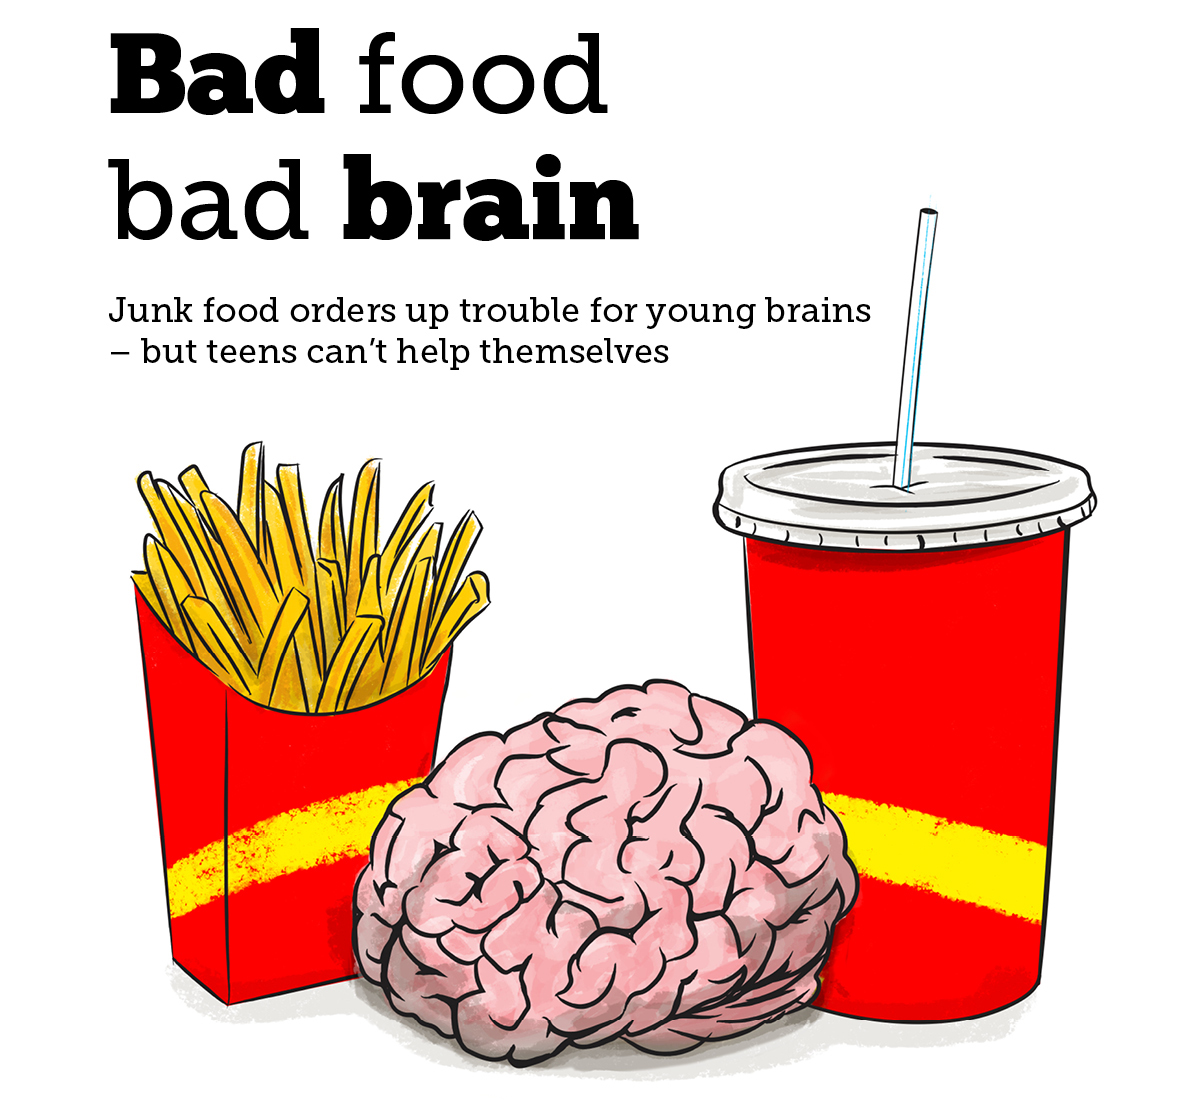 Bad food bad brain graphic - Junk food orders up trouble for young brains but teens can't help themselves